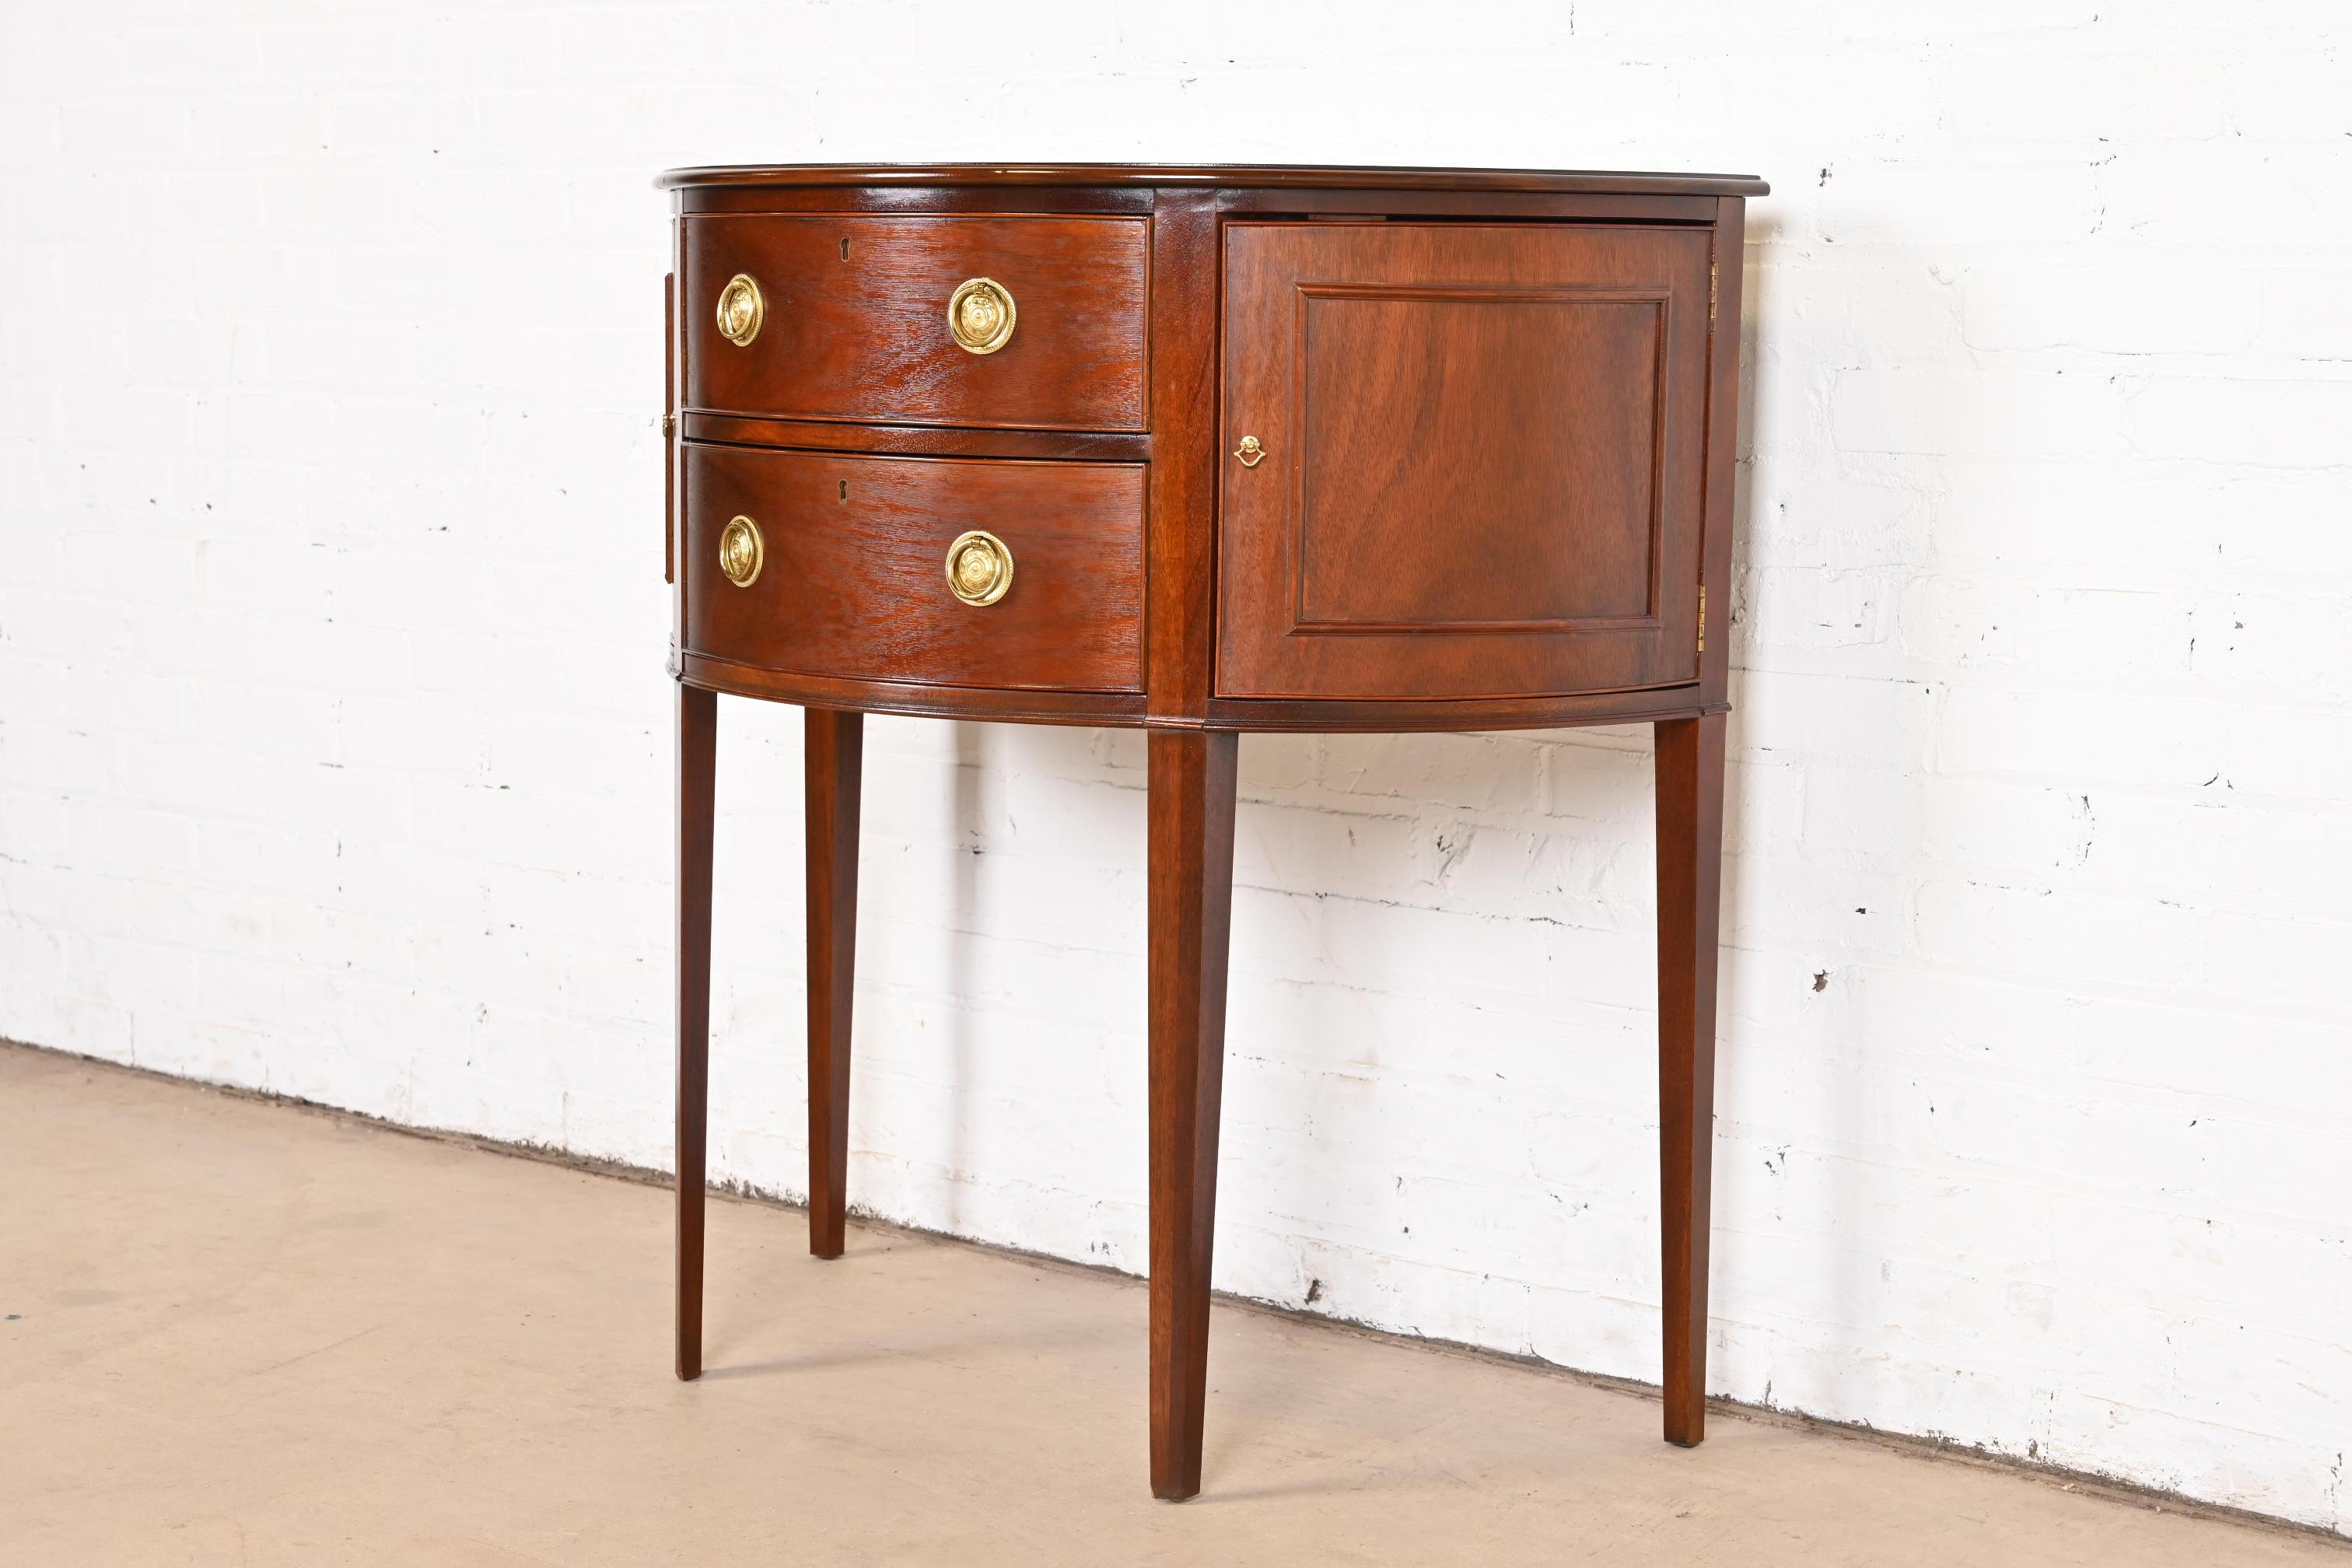 Baker Furniture Historic Charleston Federal Mahogany Demilune Cabinet In Good Condition For Sale In South Bend, IN